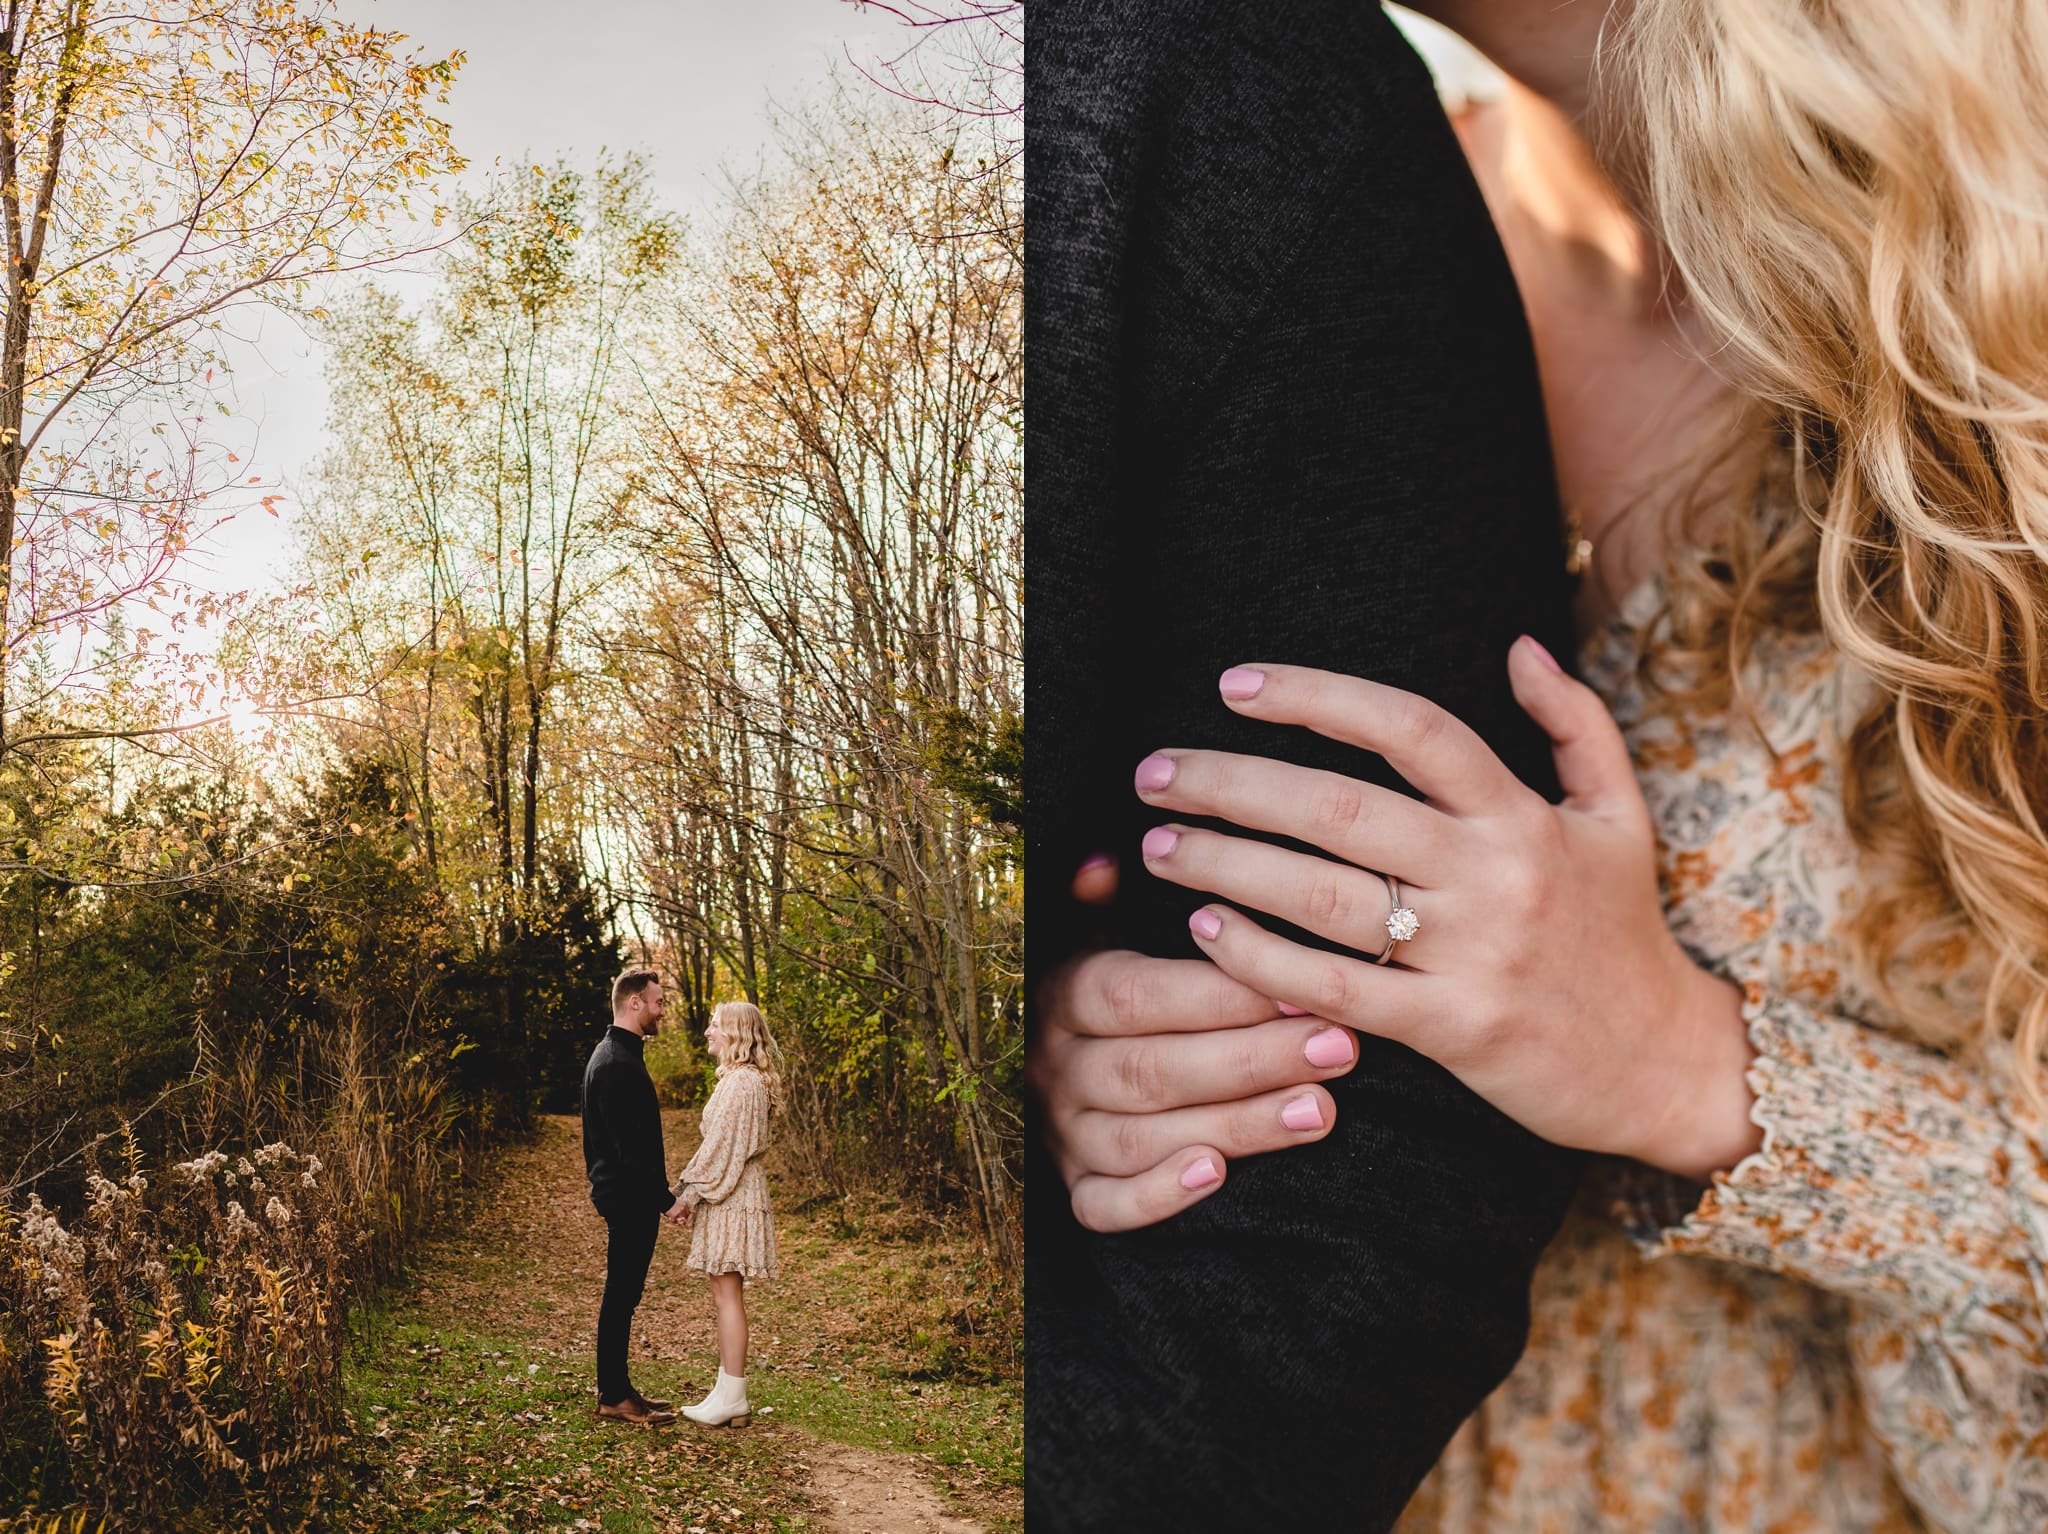 couple in the forest on a trail for engagement photos